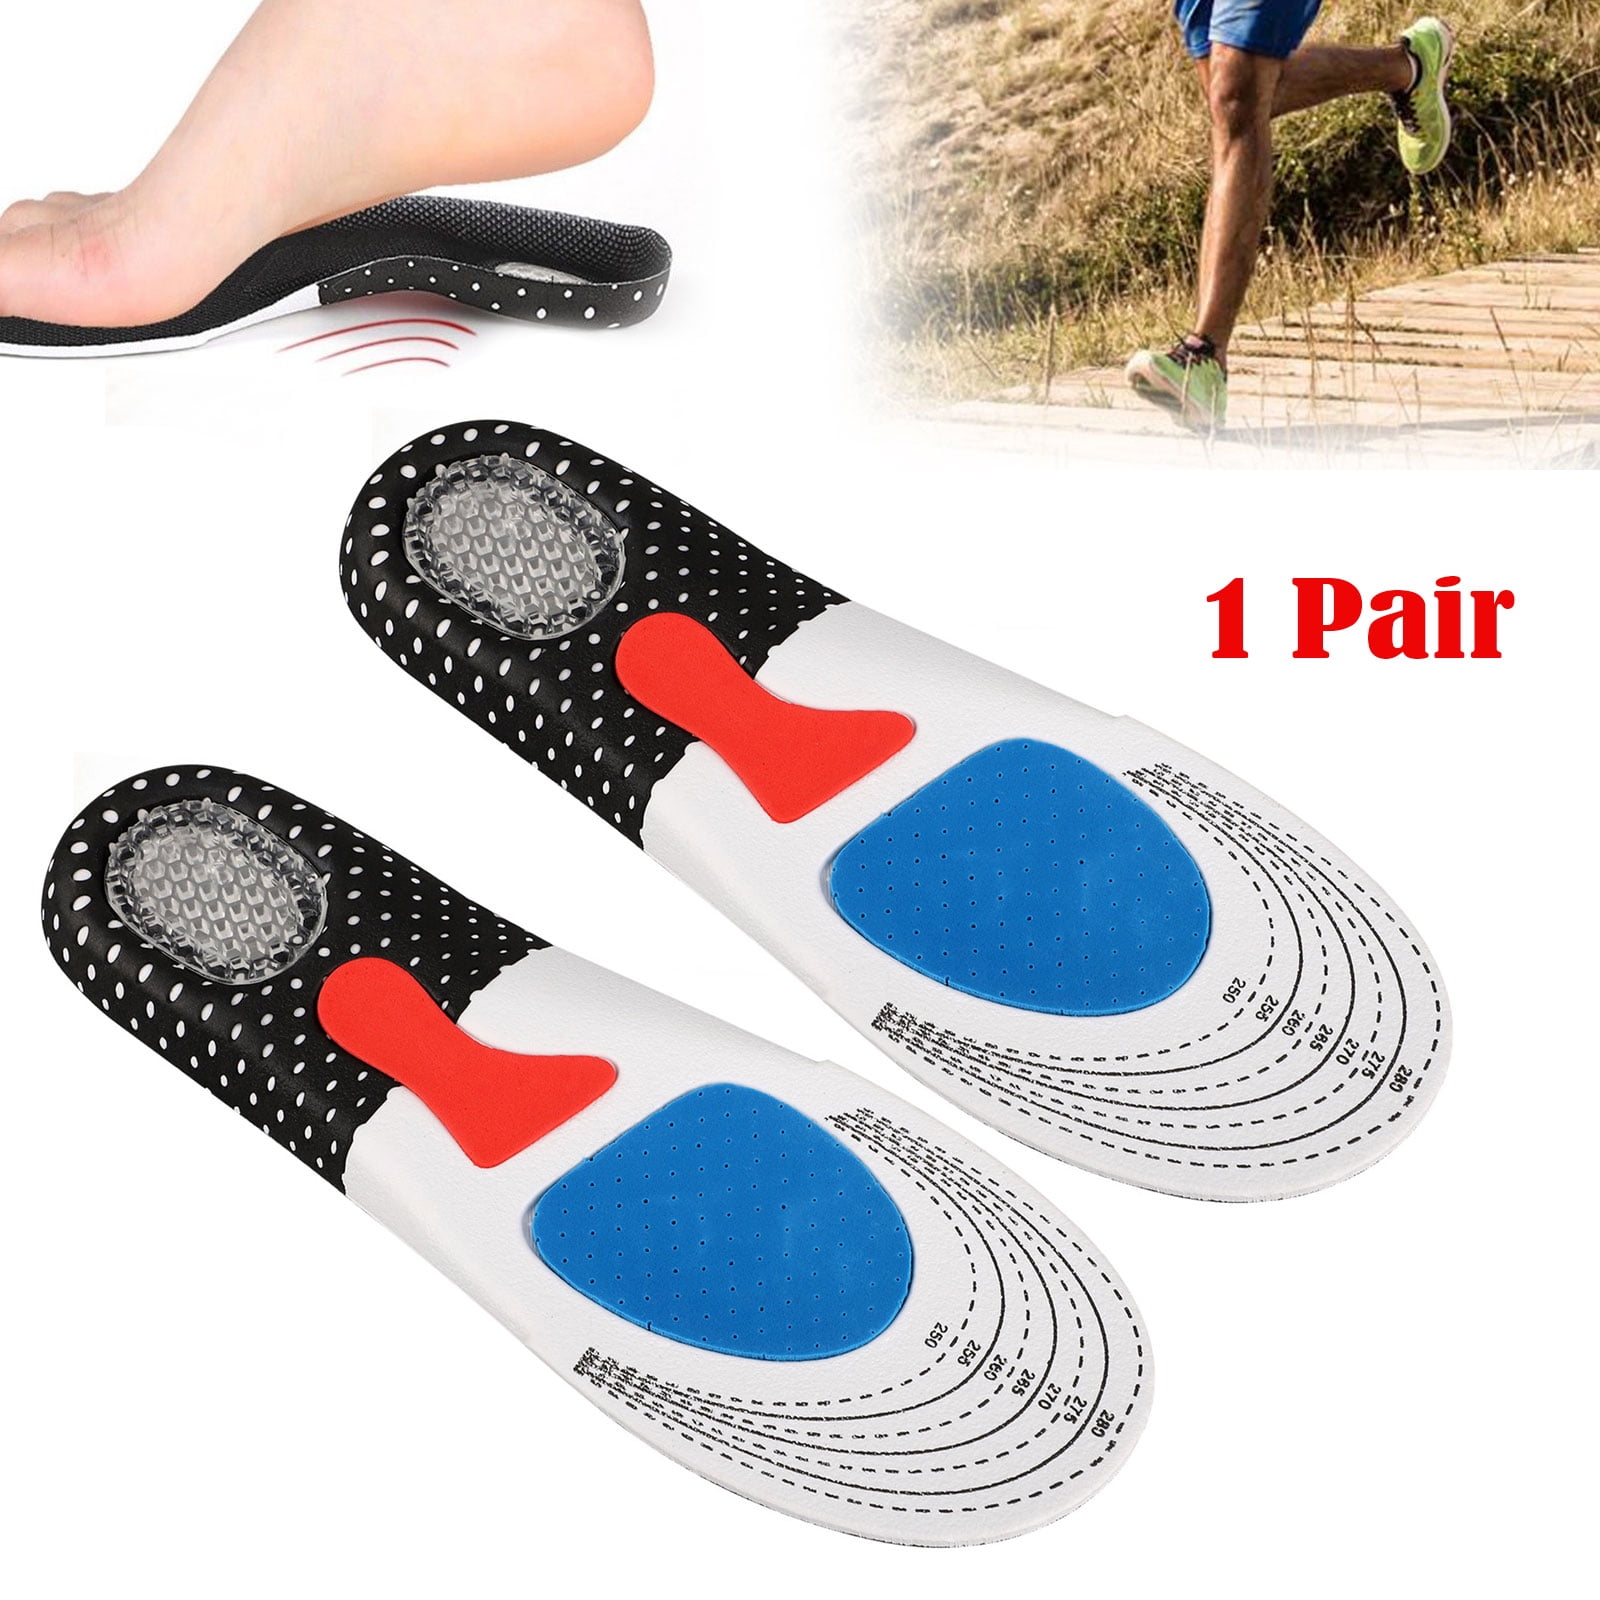 UNISEX 3D ORTHOTIC PRO INSOLES ARCH SUPPORT HEEL CUSHION PLANTAR FASCIITIS NEW 